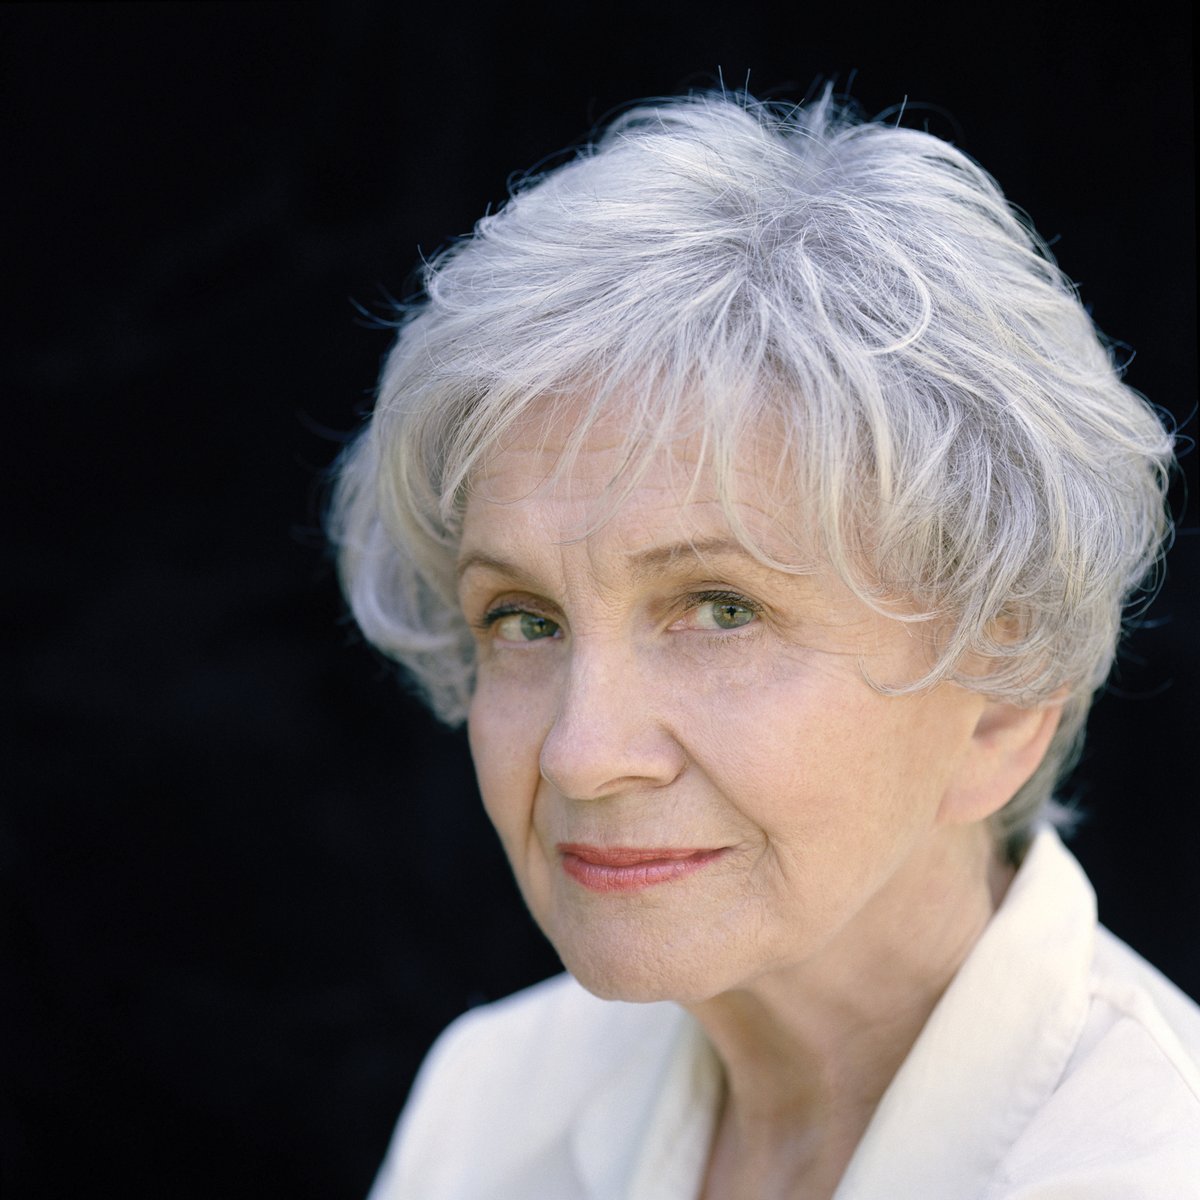 We are deeply saddened to hear of the death of Alice Munro, a Booker Prize shortlistee and International Booker winner in 2009. Her work highlighted the beauty in the everyday, and she leaves behind an extraordinary legacy. We extend our condolences to her family.